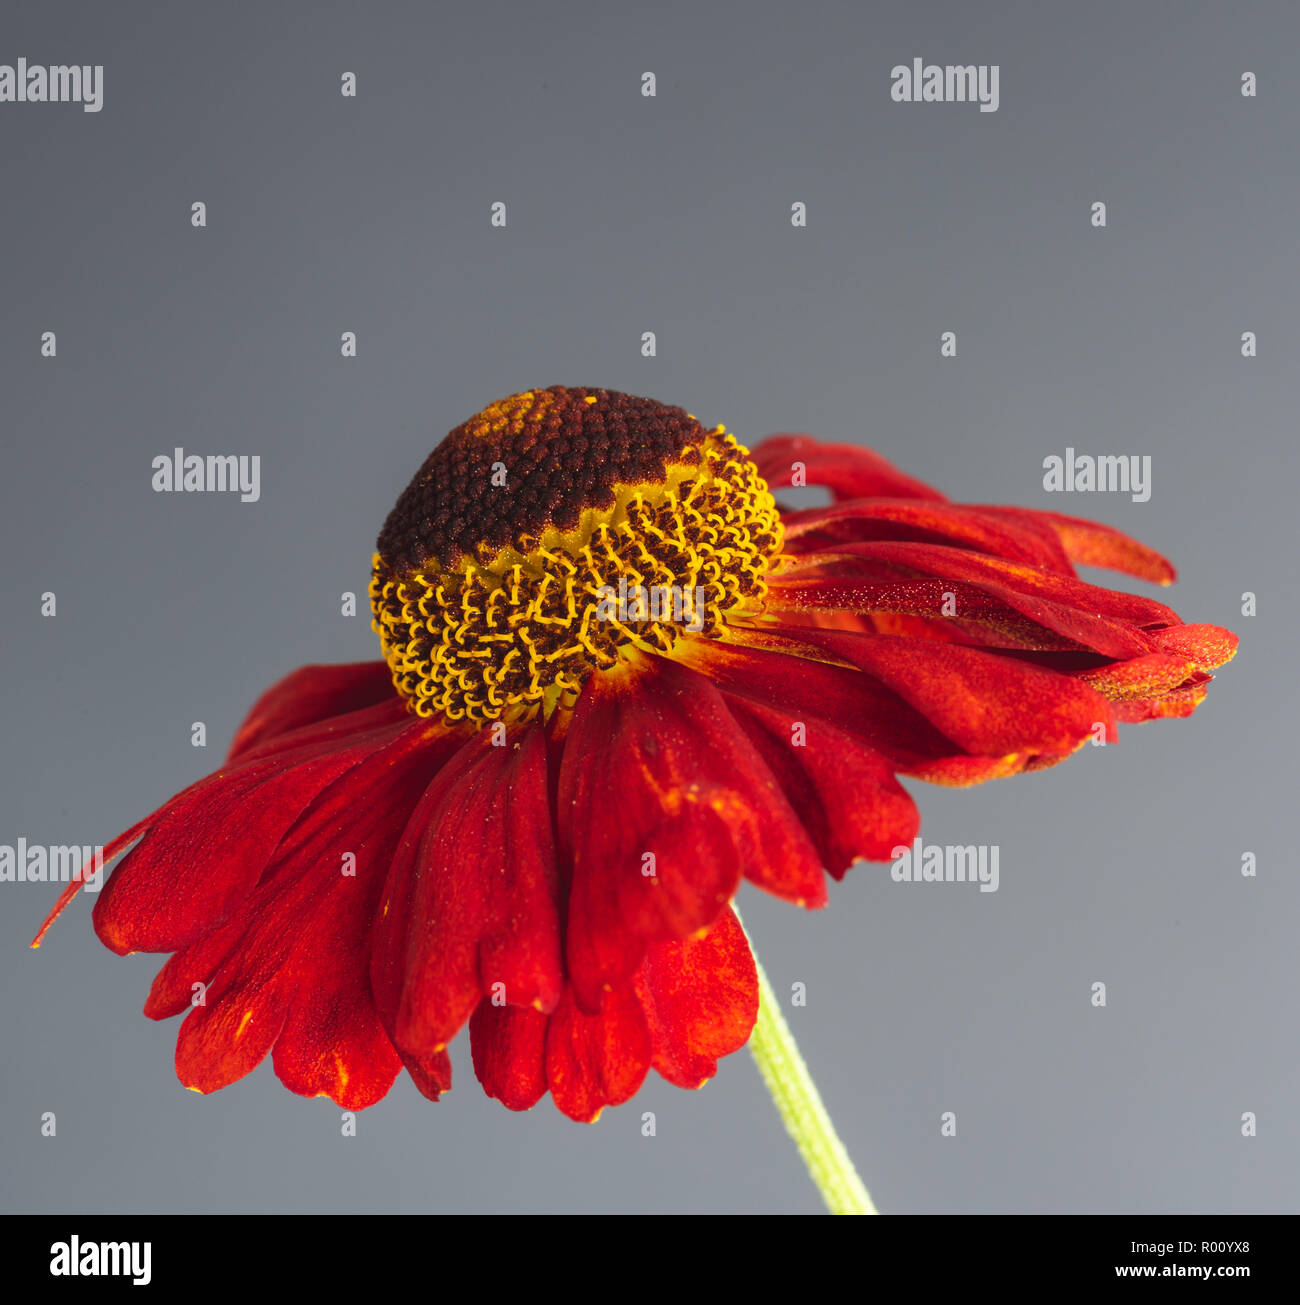 Still life fine art floral colorful macro of a single isolated wide open yellow red helenium / bride of the sun blossom on gray background Stock Photo